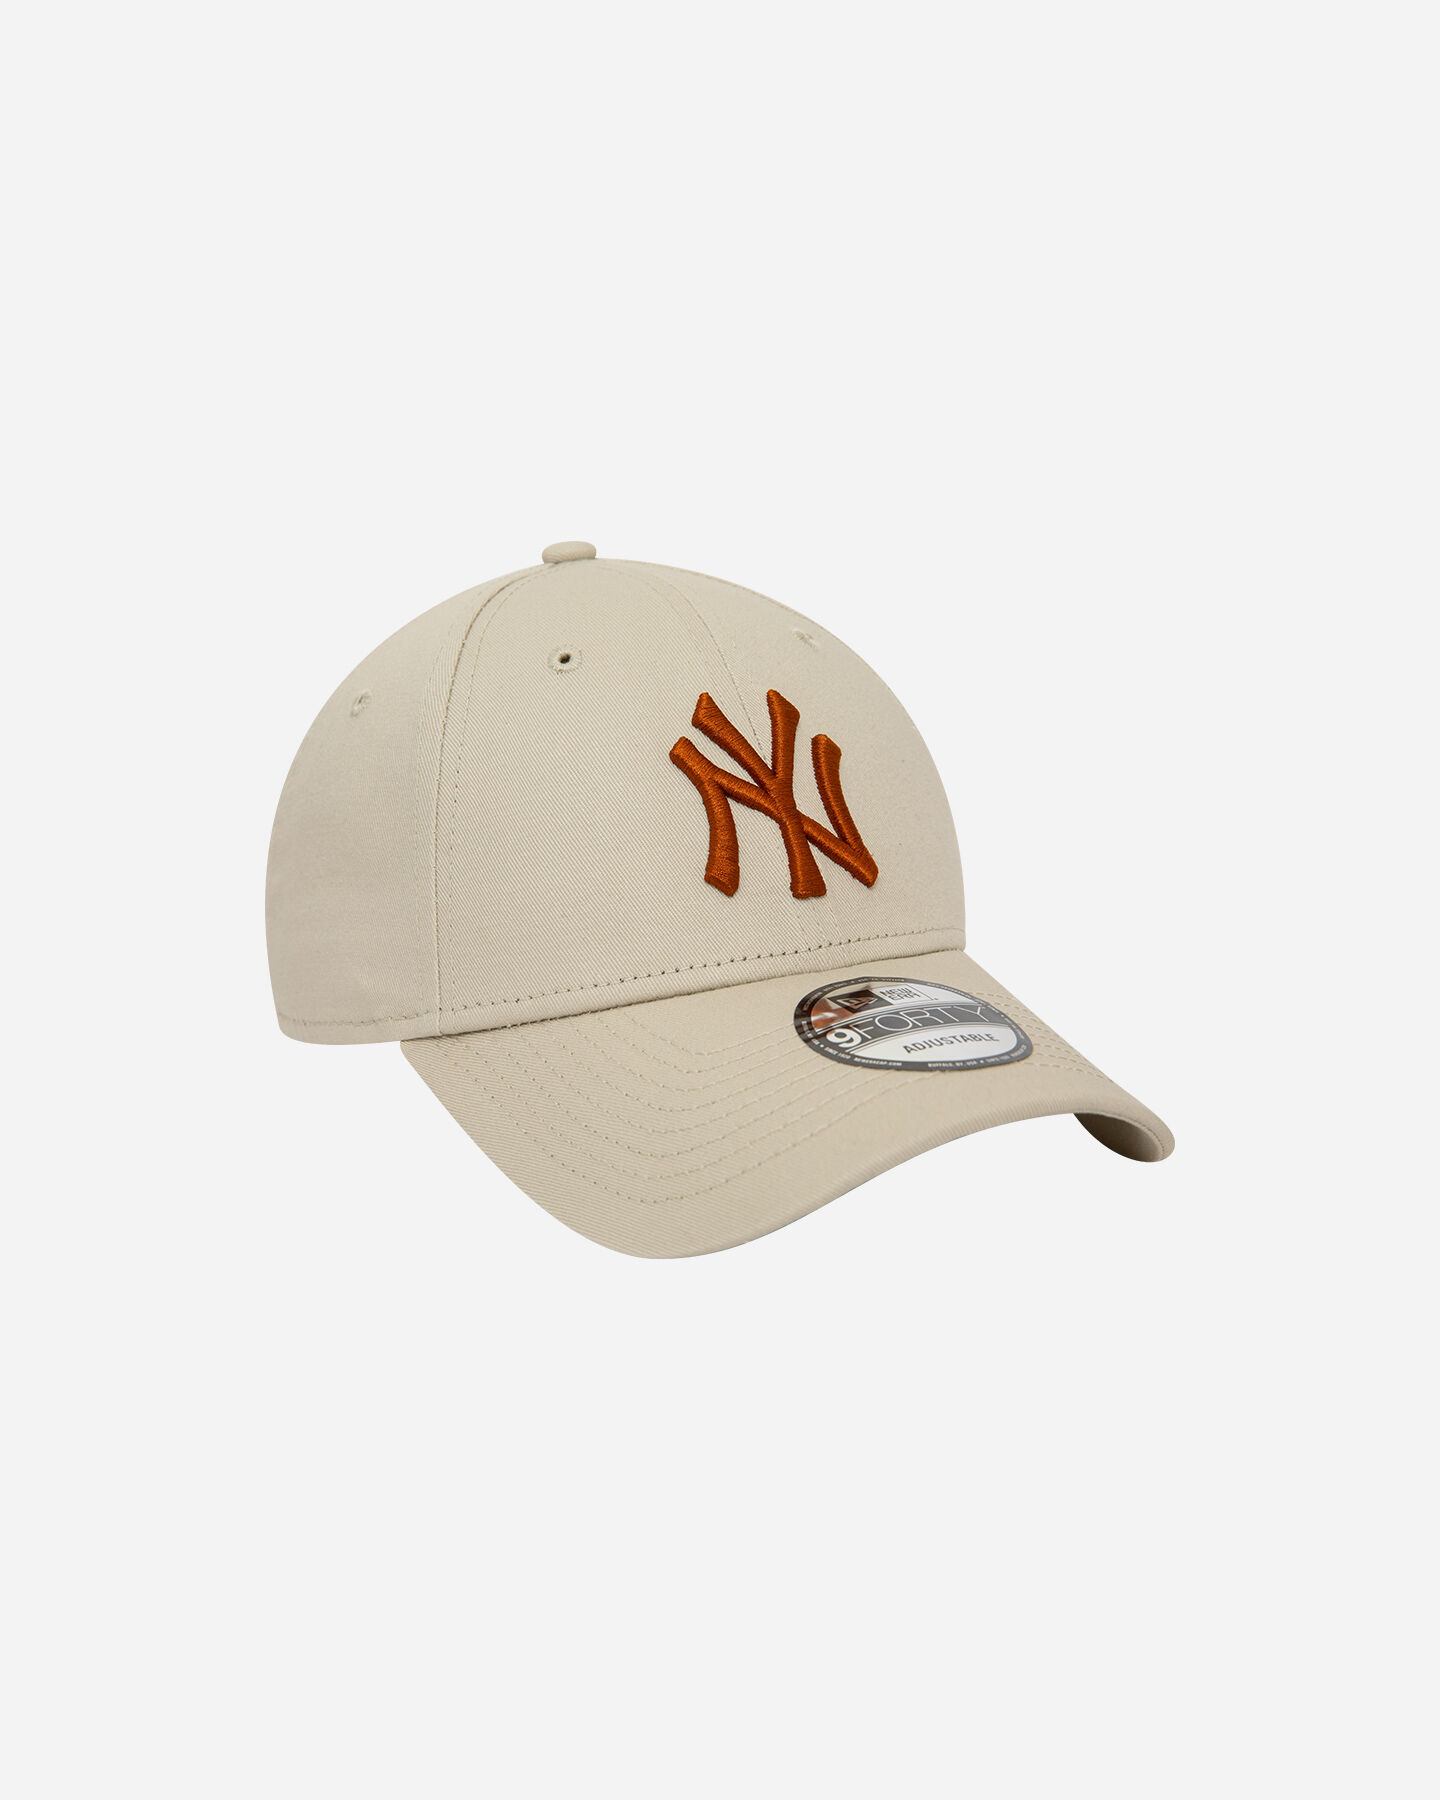  Cappellino NEW ERA 9FORTY MLB LEAGUE ESSENTIAL NEW YORK YANKEES M S5671054|270|OSFM scatto 2